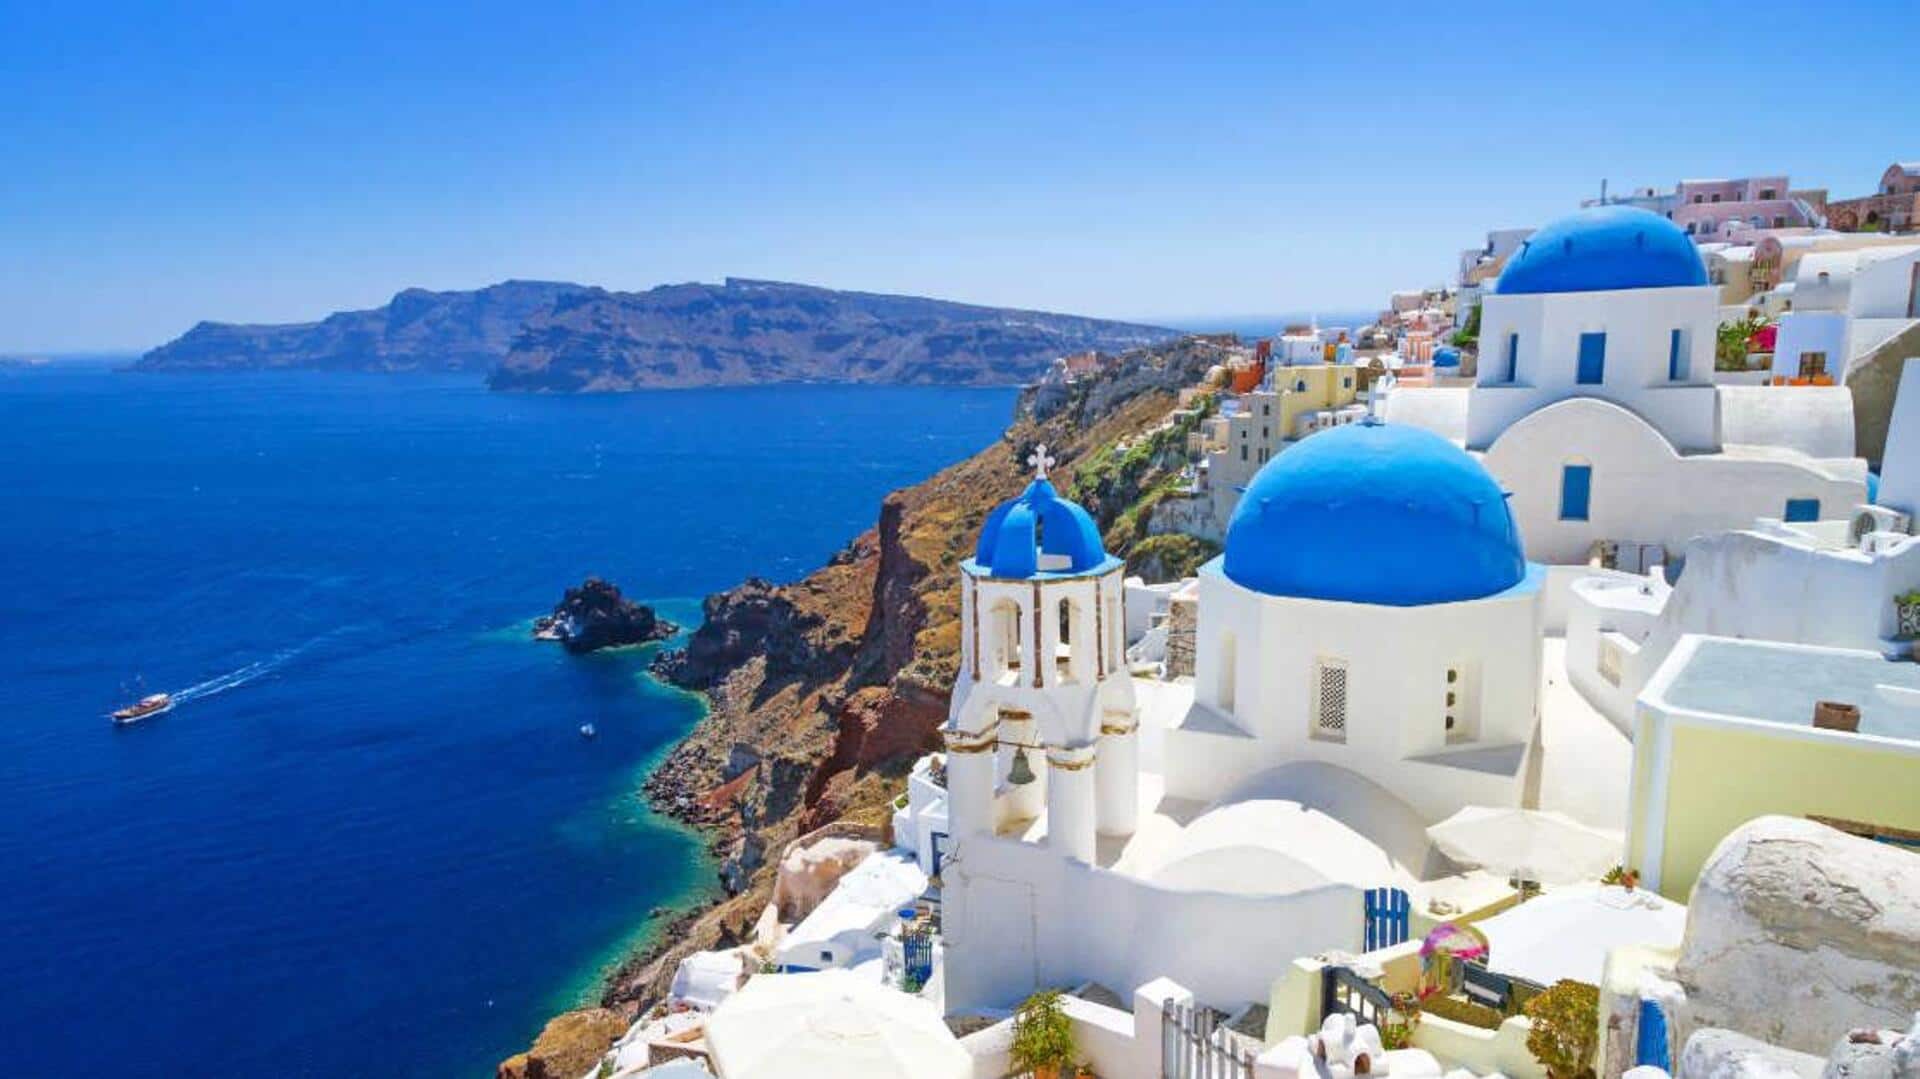 Go on a romantic trip to Santorini with your bae